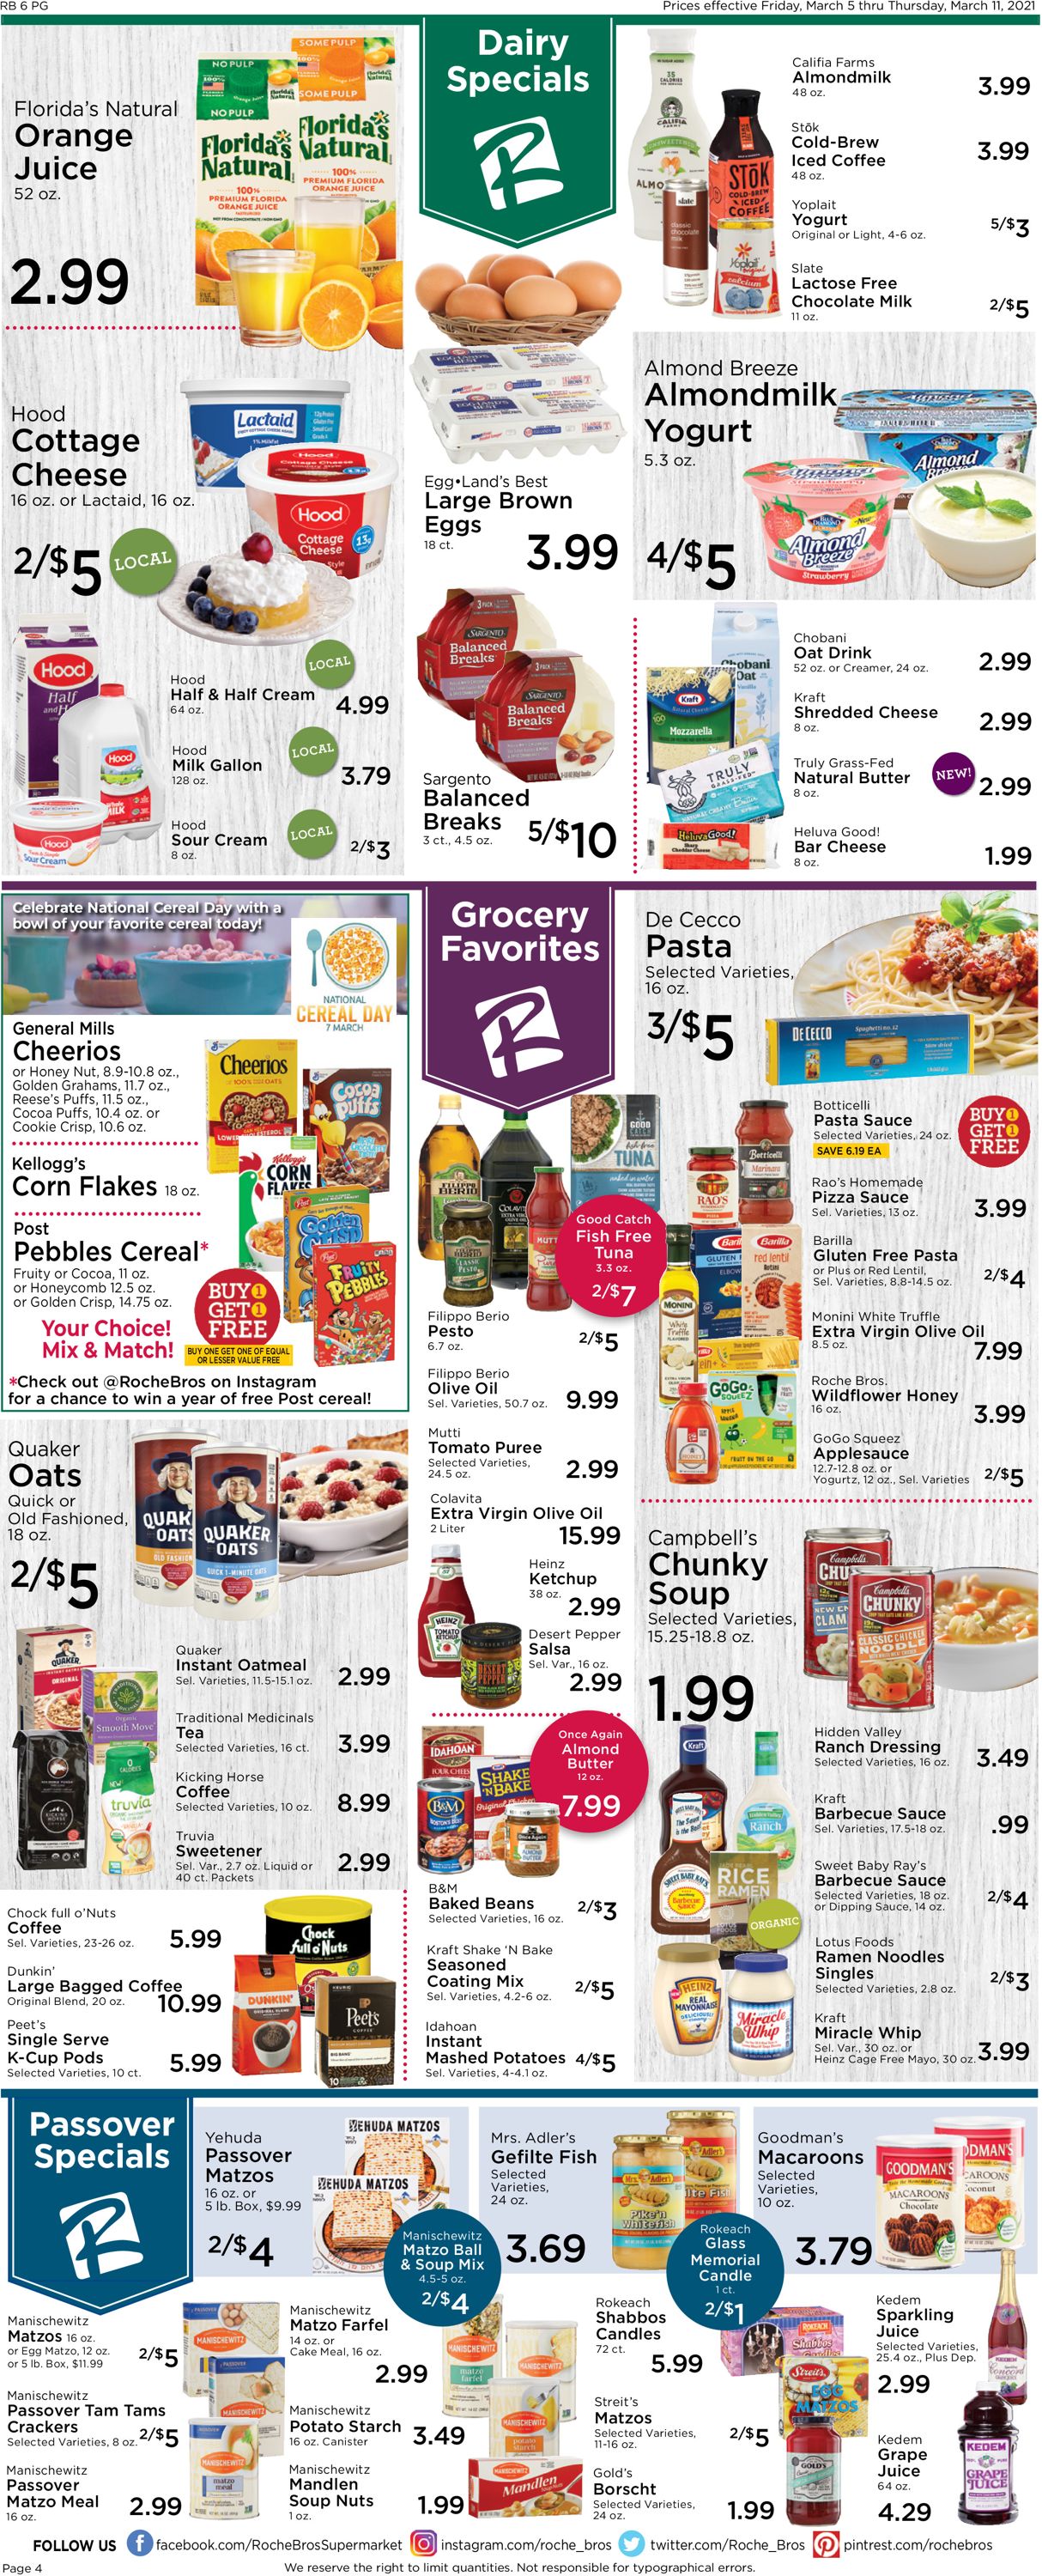 Catalogue Roche Bros. Supermarkets from 03/05/2021